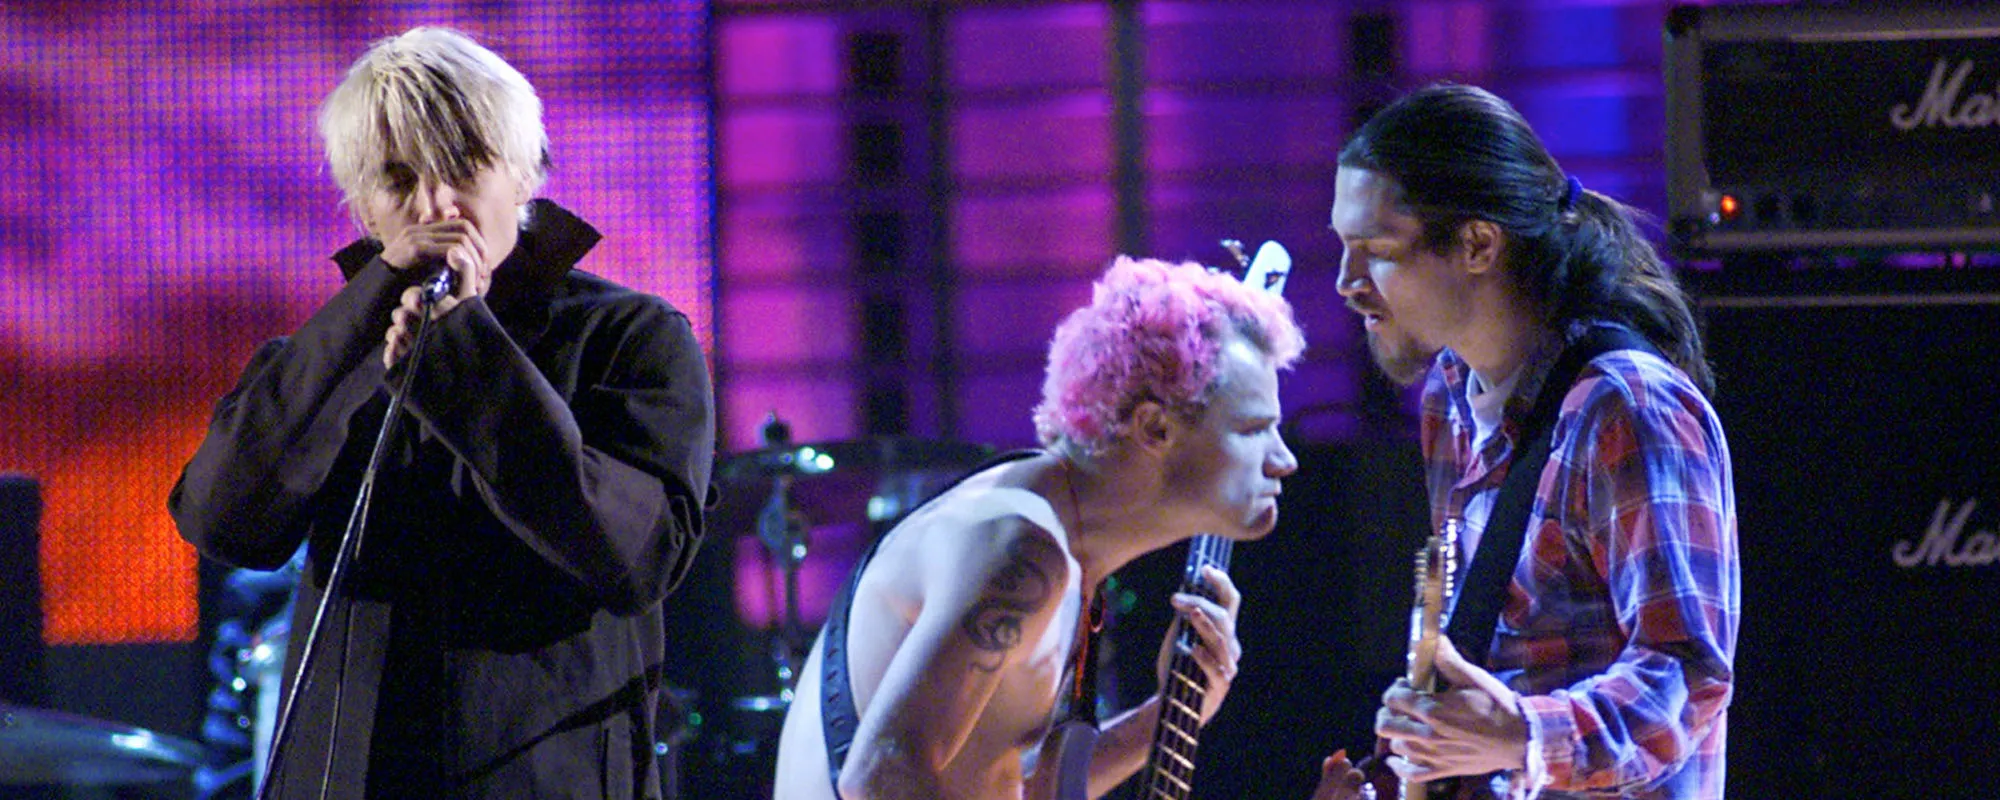 The Meaning Behind the Addictive Song “Under the Bridge” by Red Hot Chili Peppers